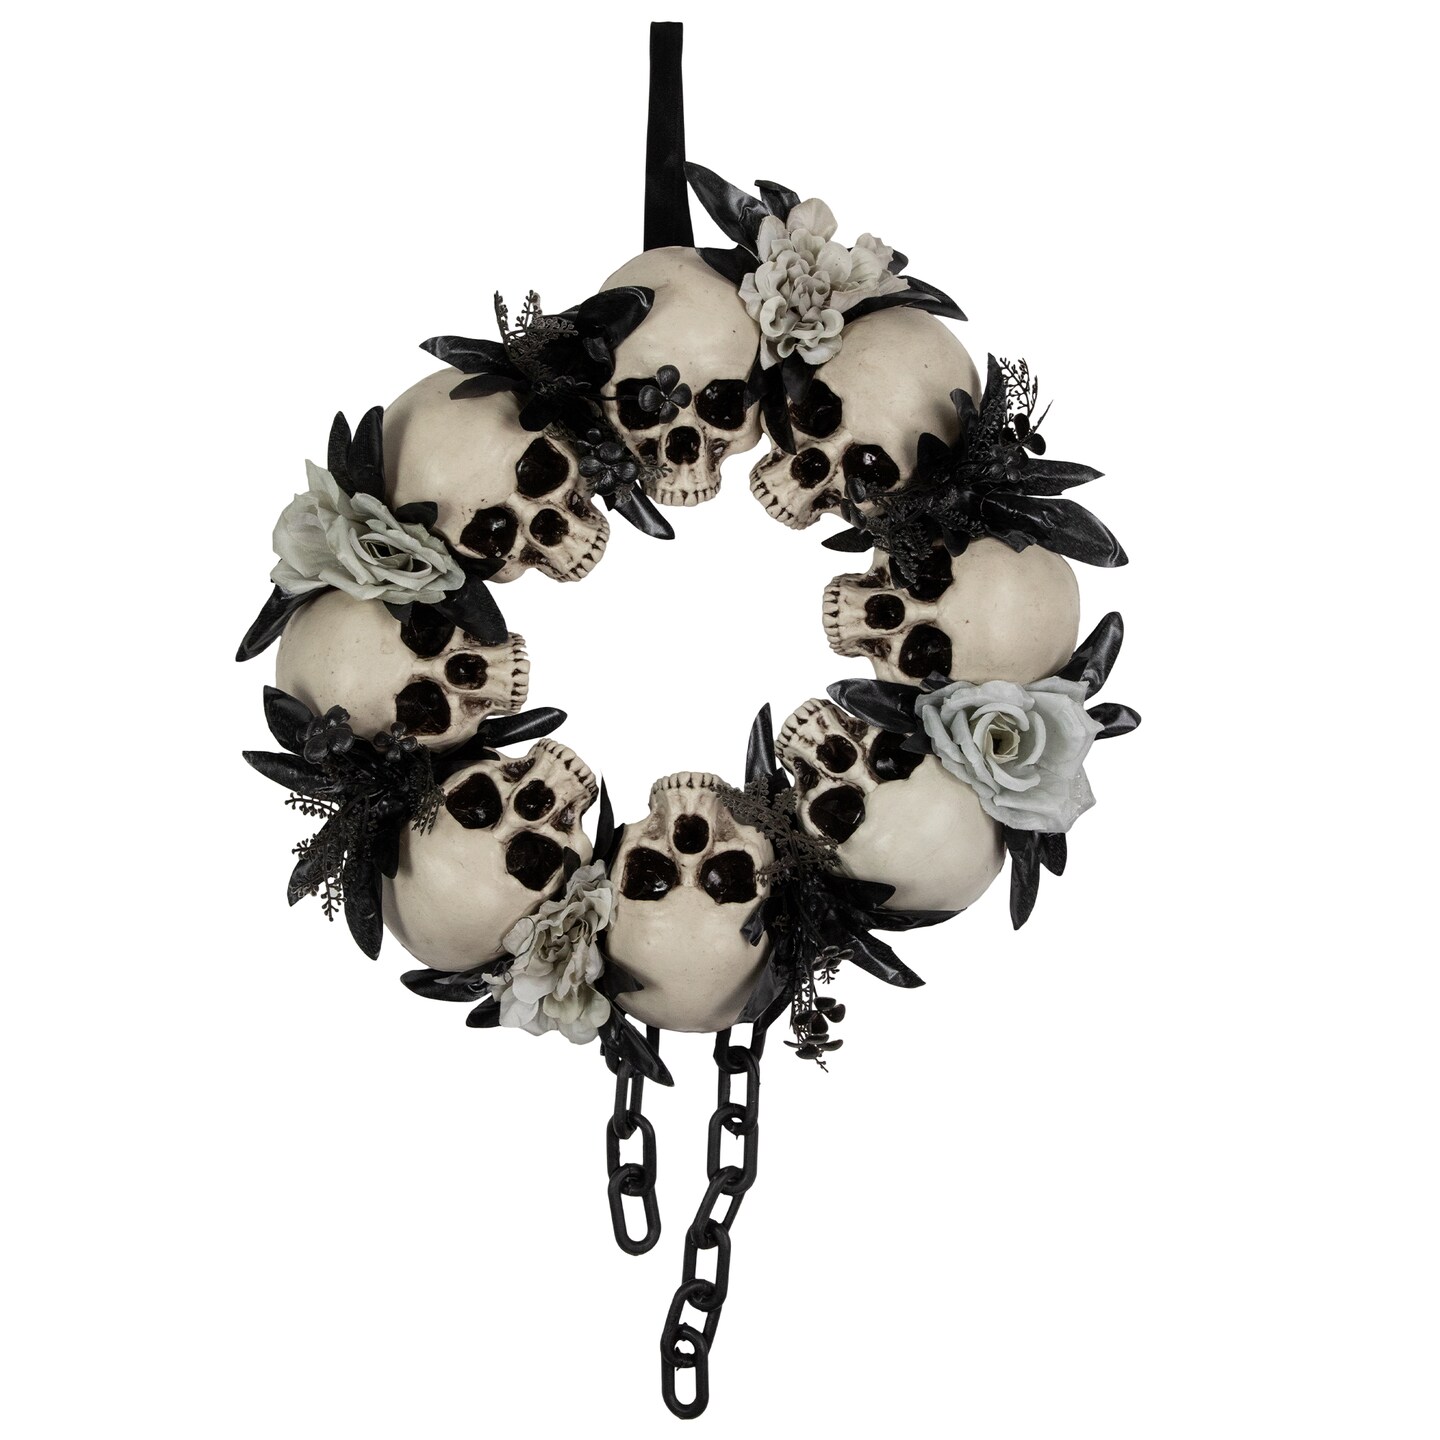 Northlight Skulls and Chains with Gray Roses Halloween Wreath, 15-Inch, Unlit